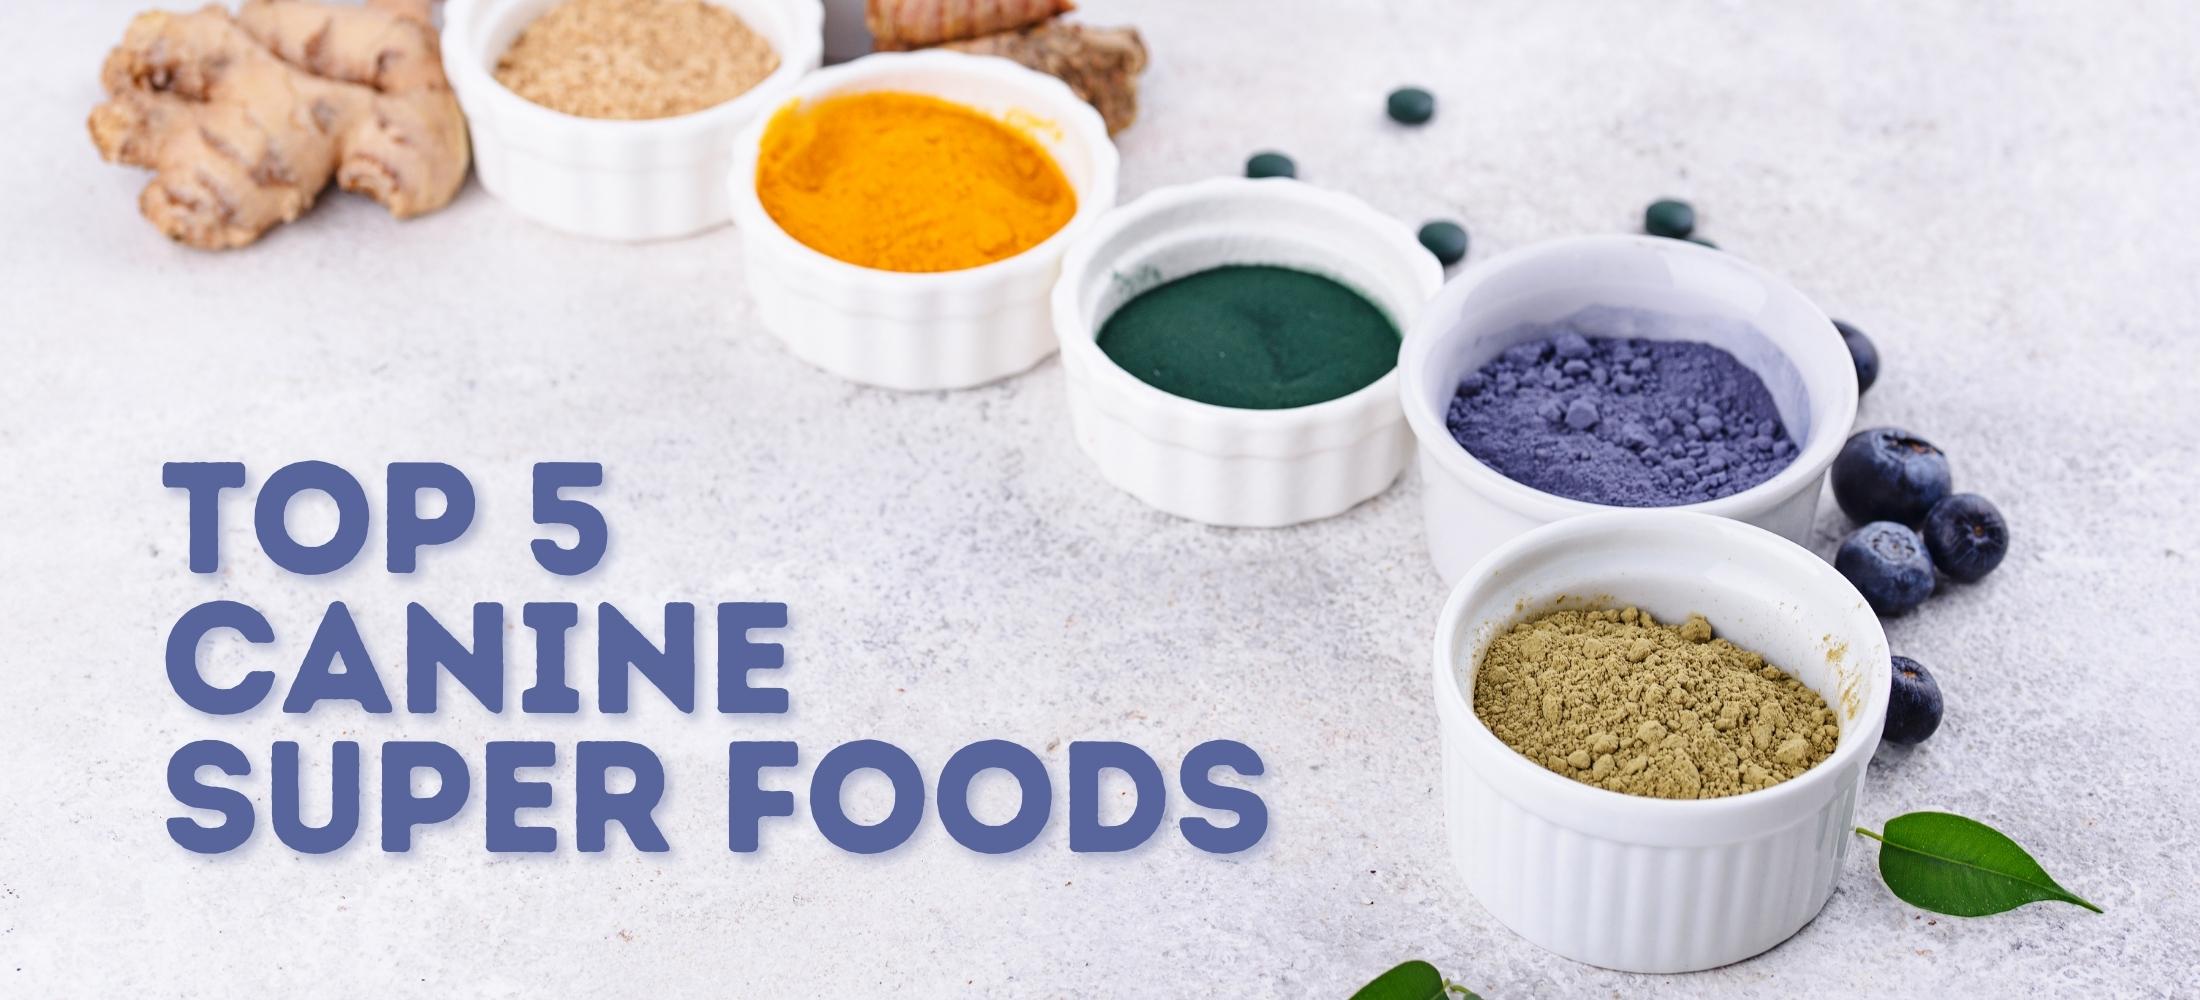 Top 5 Canine Superfoods with turmeric, spirulina, butterfly pea flower